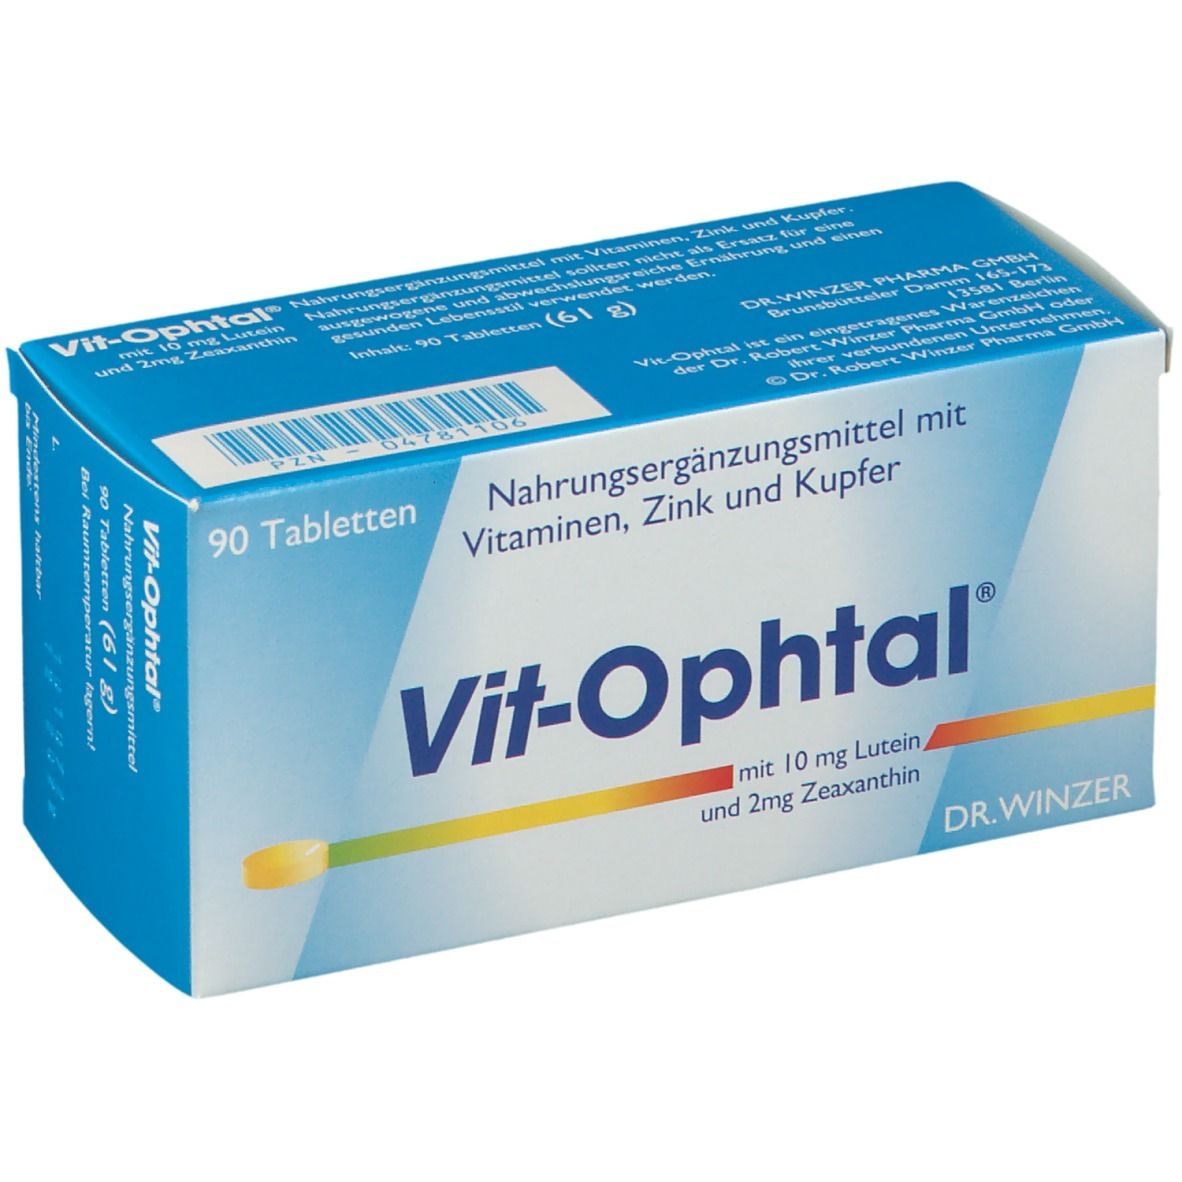 Vit-Ophtal® with 10 mg lutein